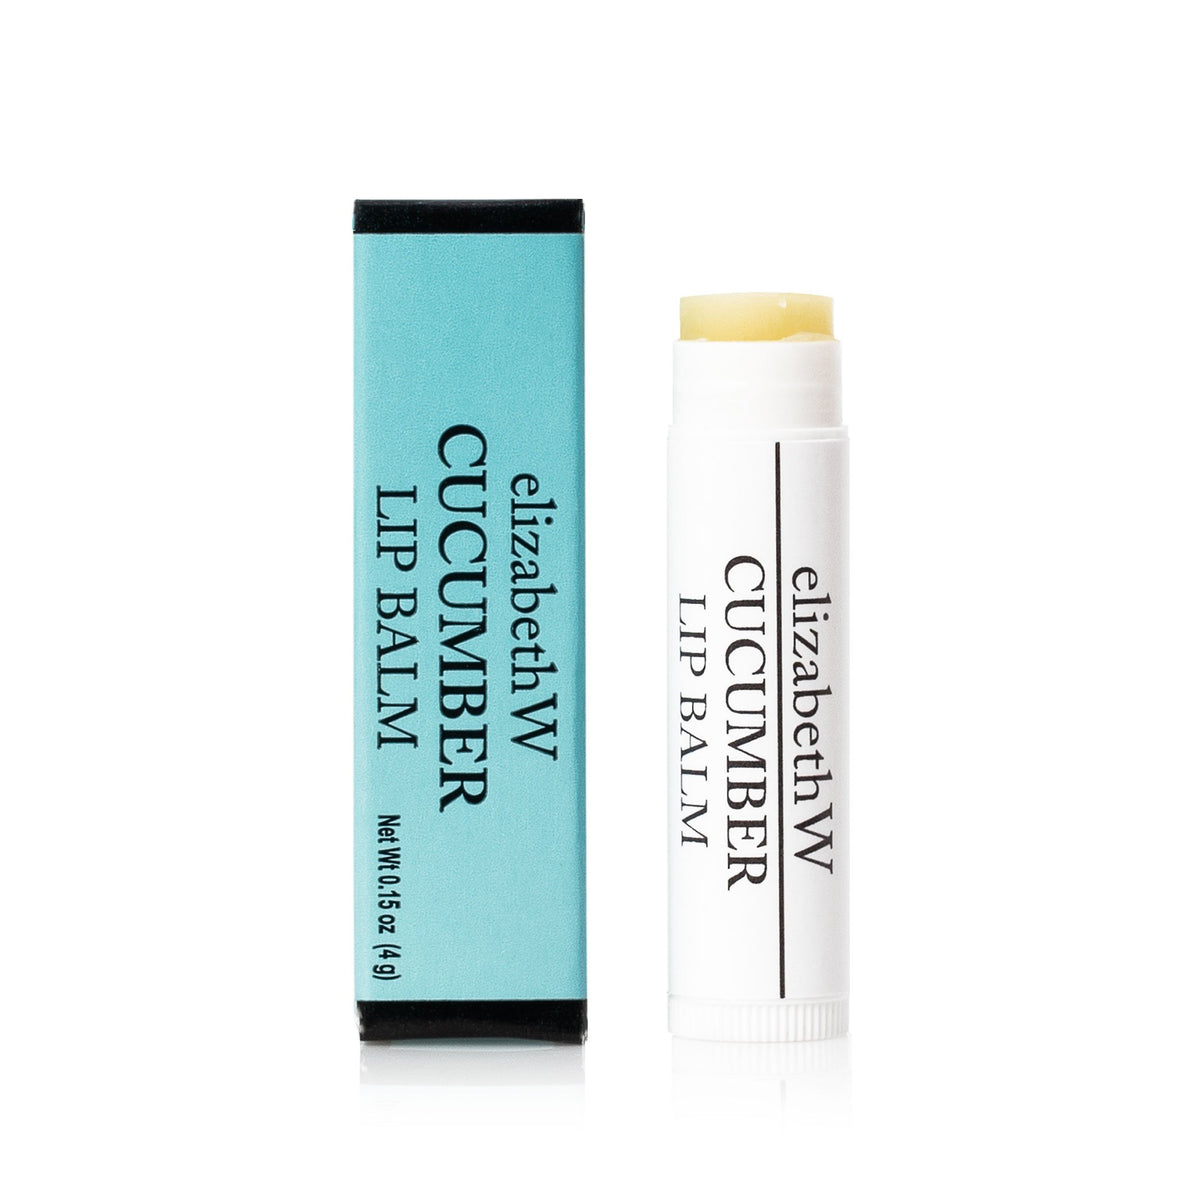 A tube of elizabeth W Botanical Apothecary Cucumber Lip Balm next to its turquoise packaging box on a white background. The tube is open, showing the balm stick.